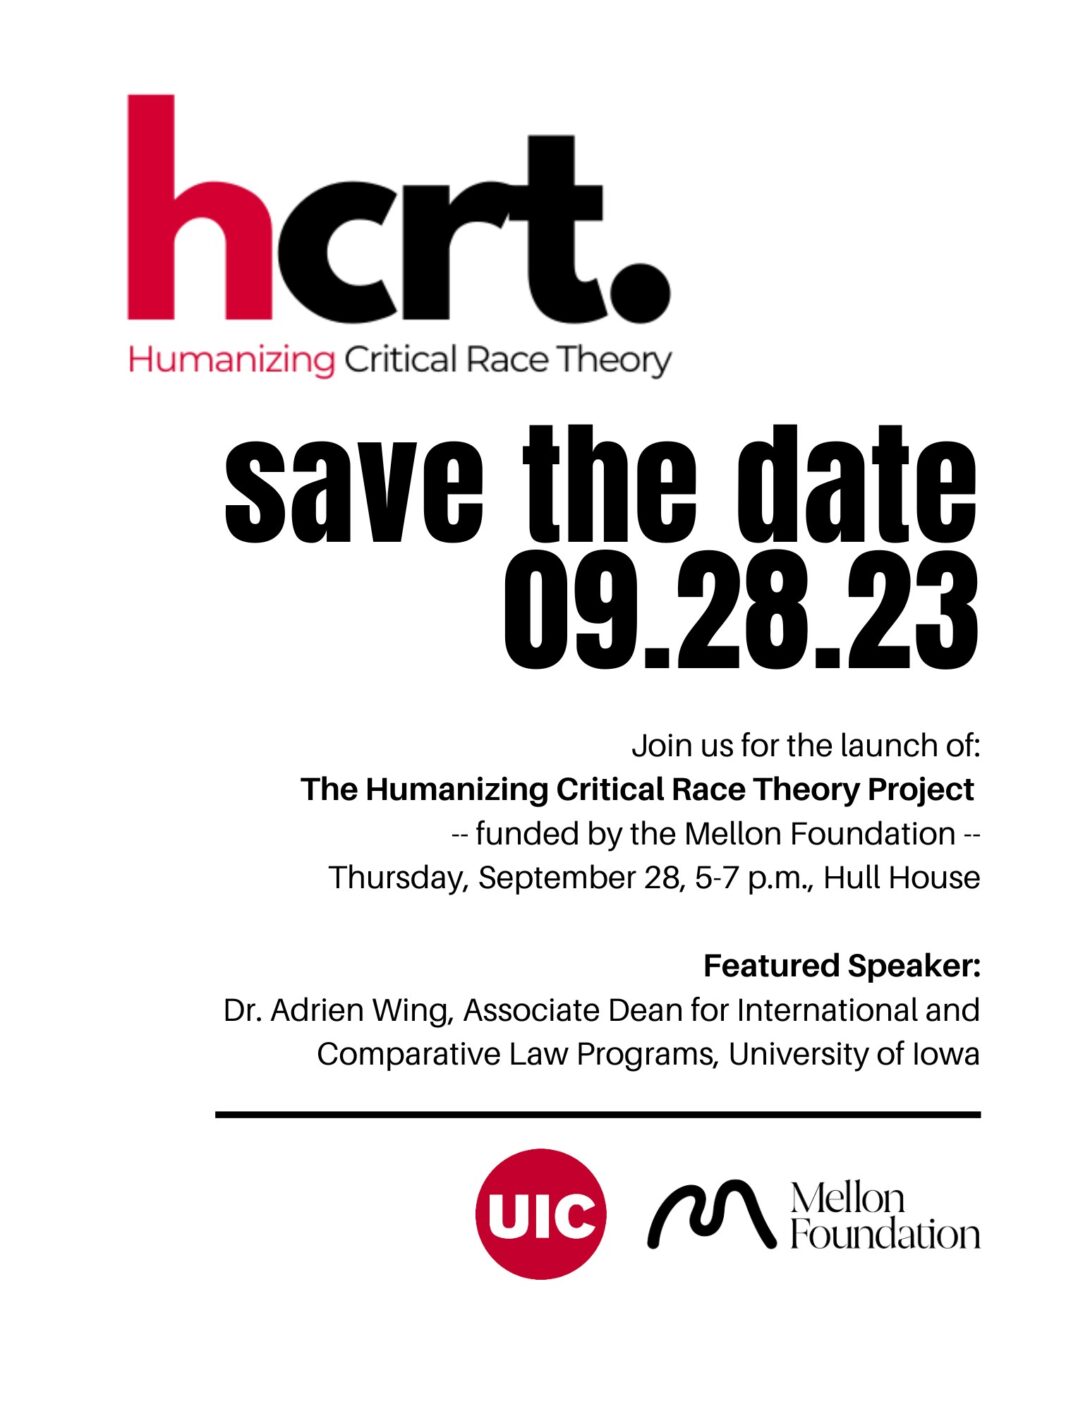 Save the date 9/28/23; Join us for the launch of The Humanizing Critical Race Theory Project Funded by the Mellon Foundation